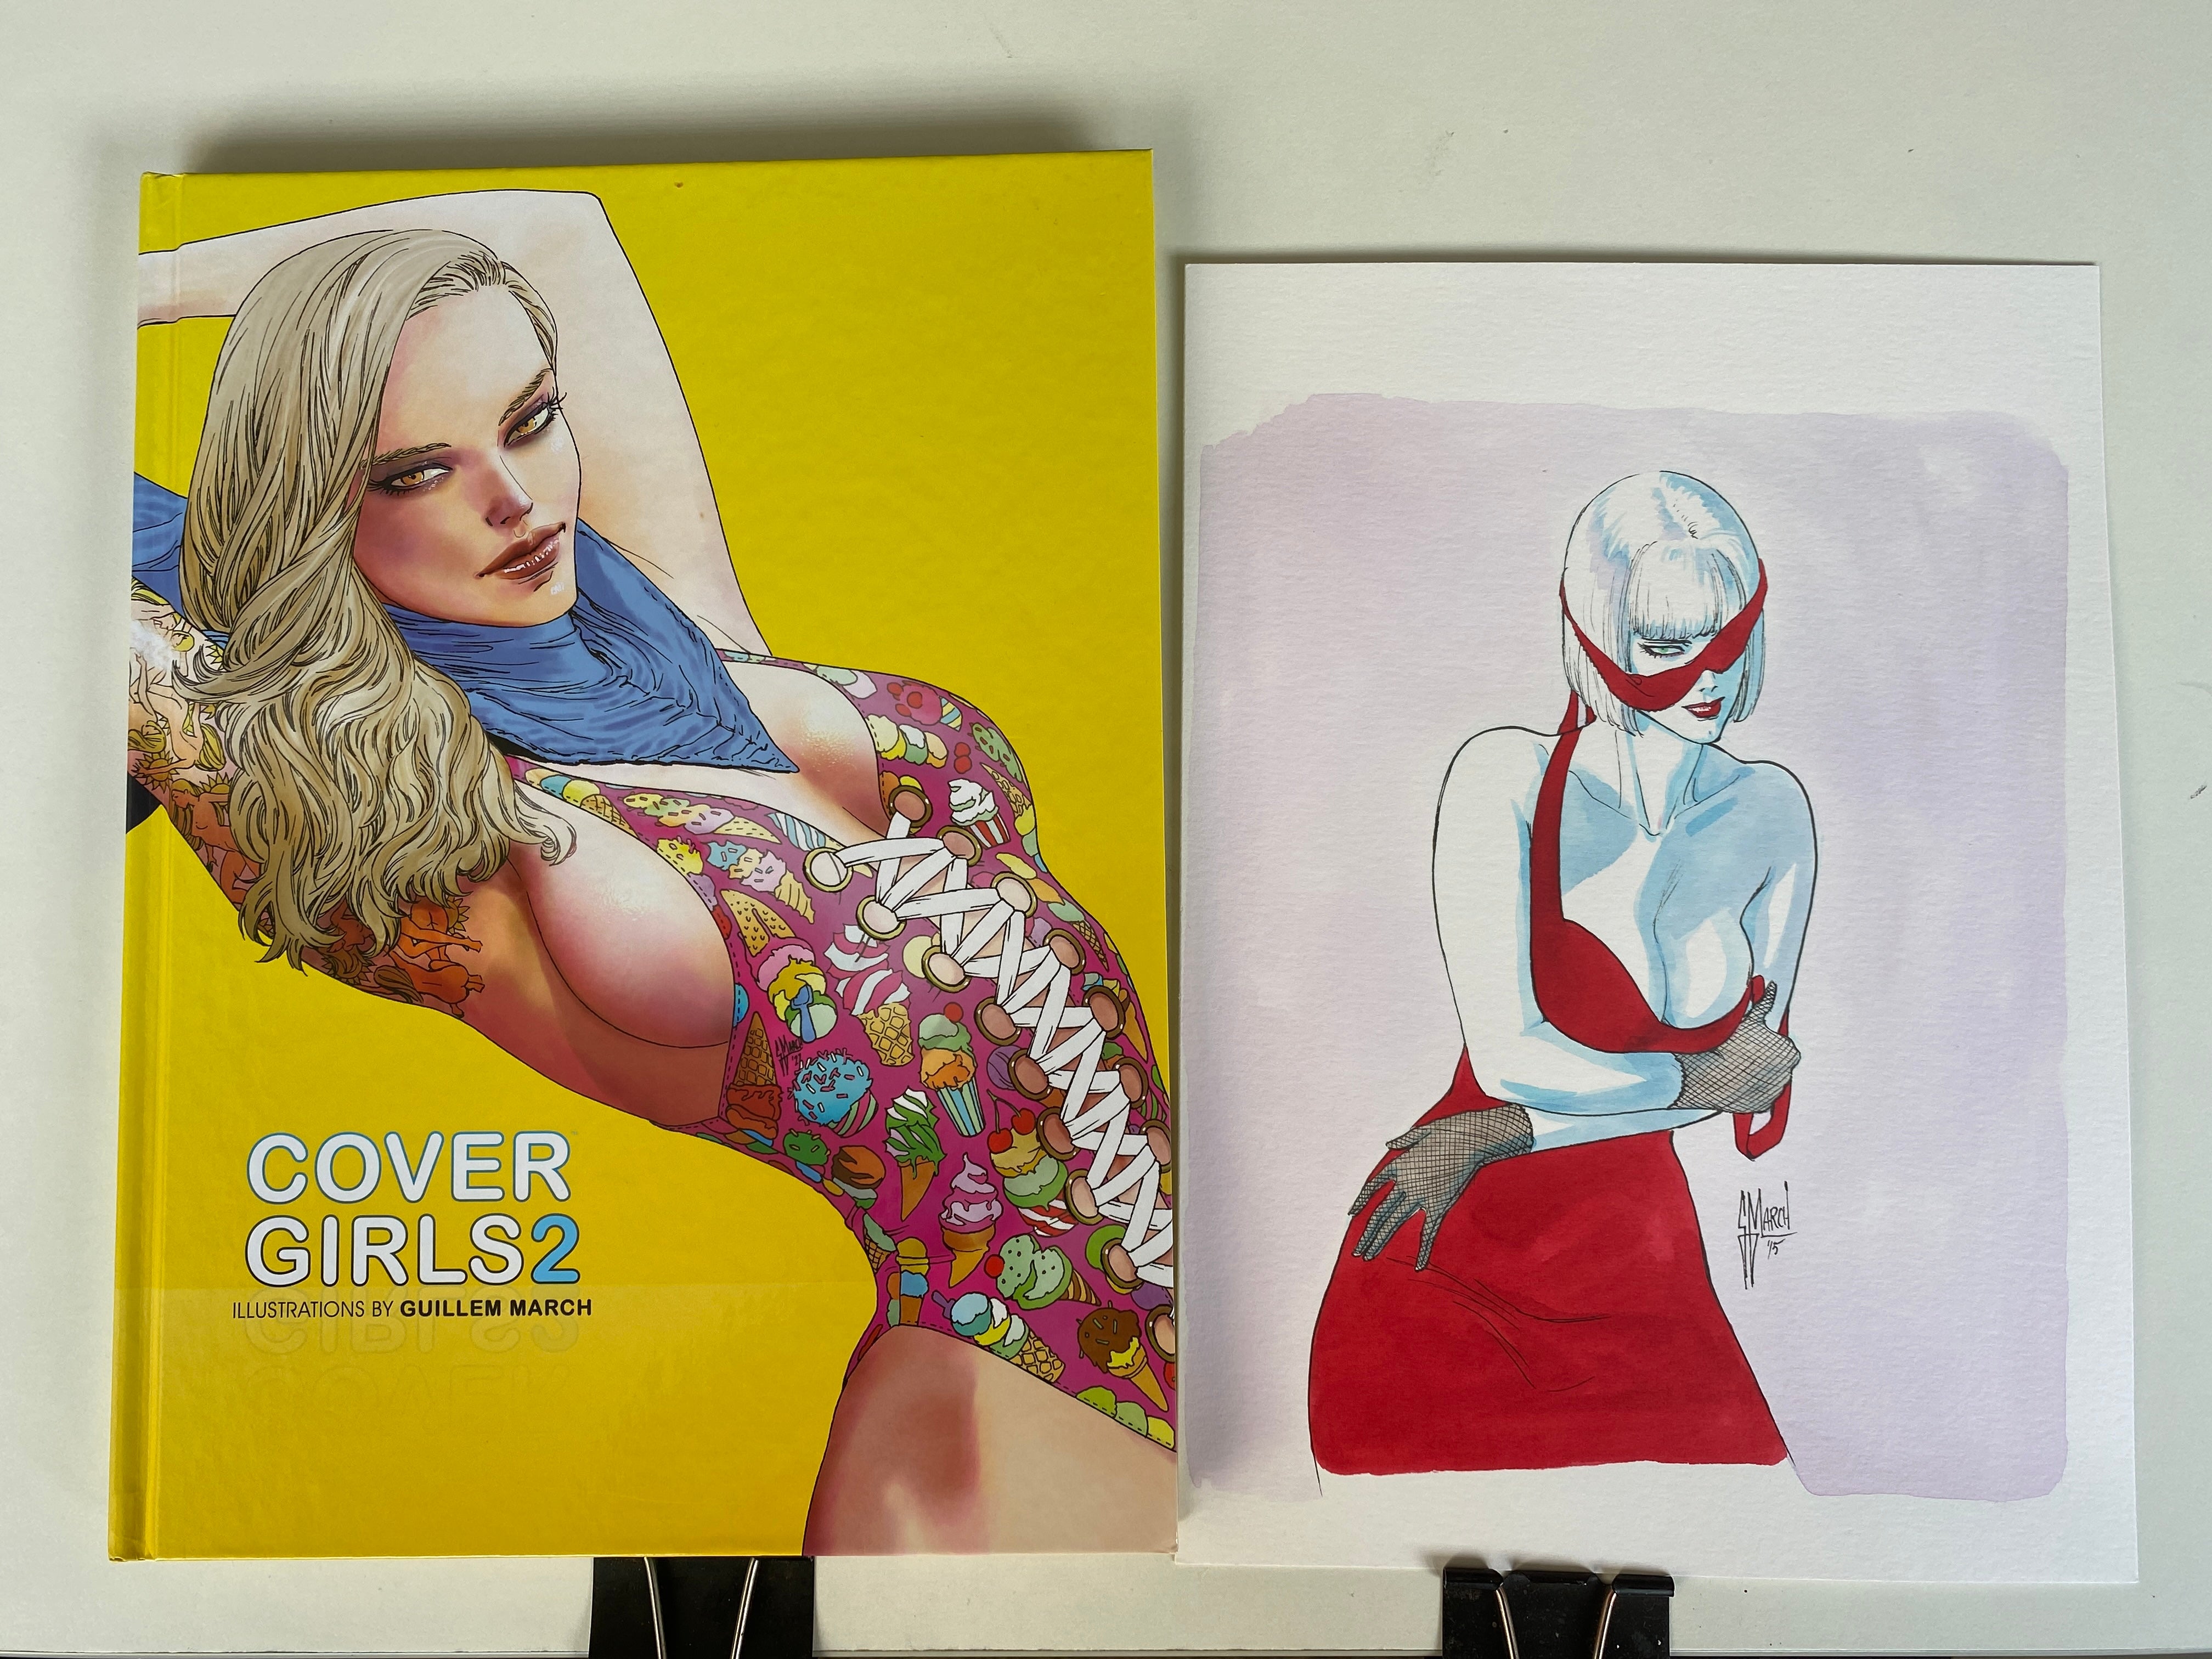 Guillem March Original Art Cover Girls 2 Published Art (Cover Girls 2 Book Included) 1